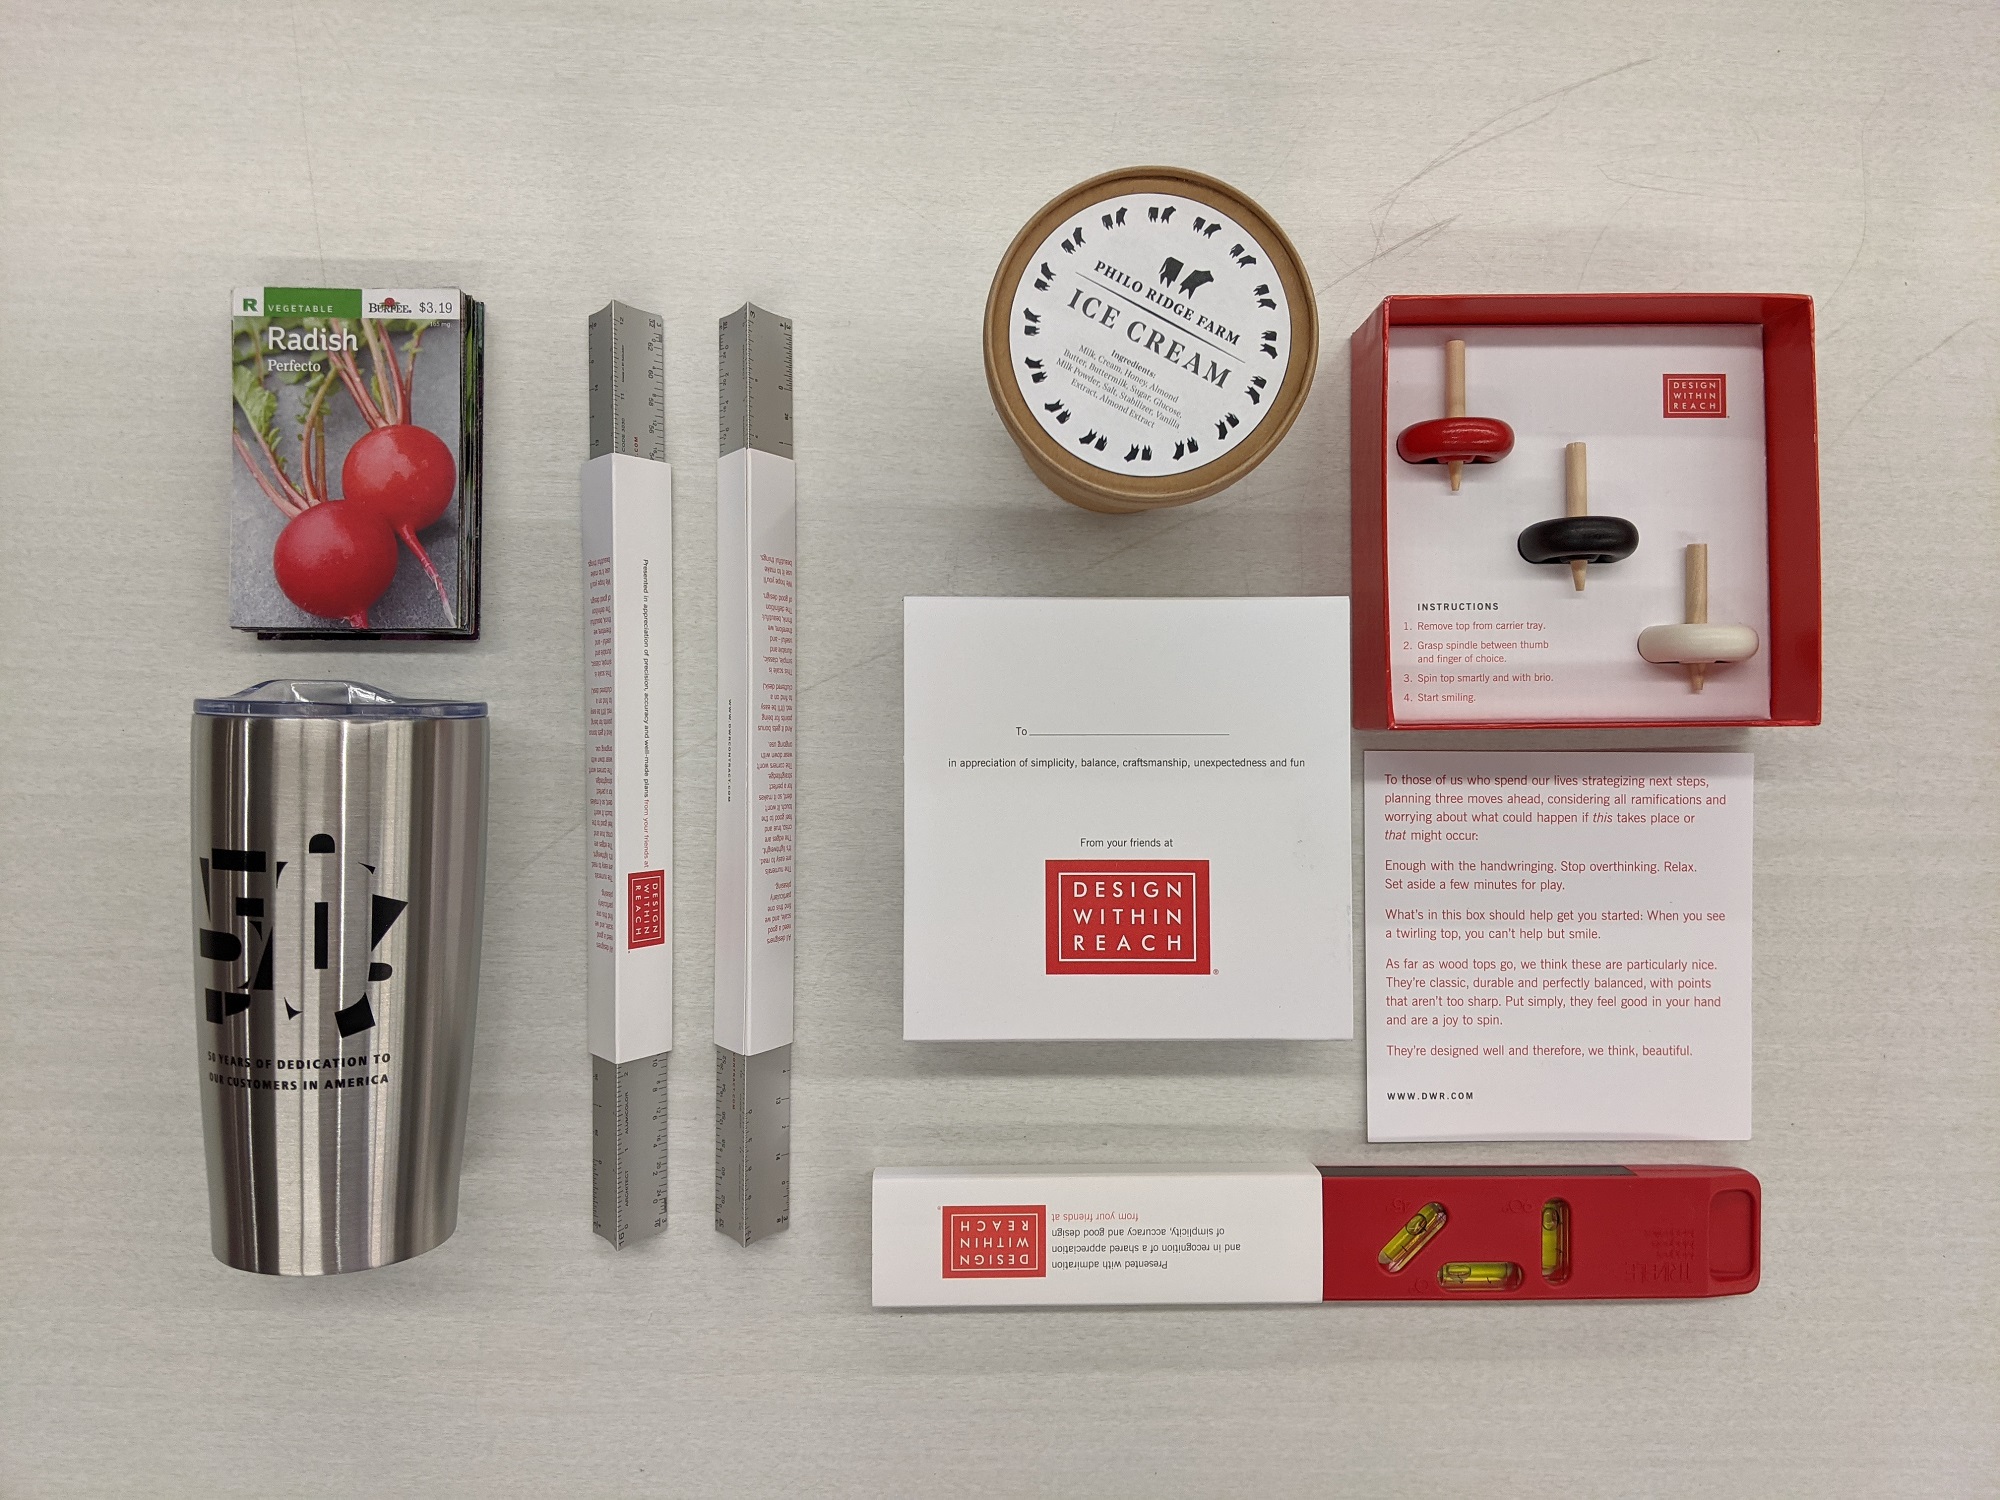 A variety of objects on a table, including a thermos, rulers, levels, radish seeds, an ice cream container, and tops.